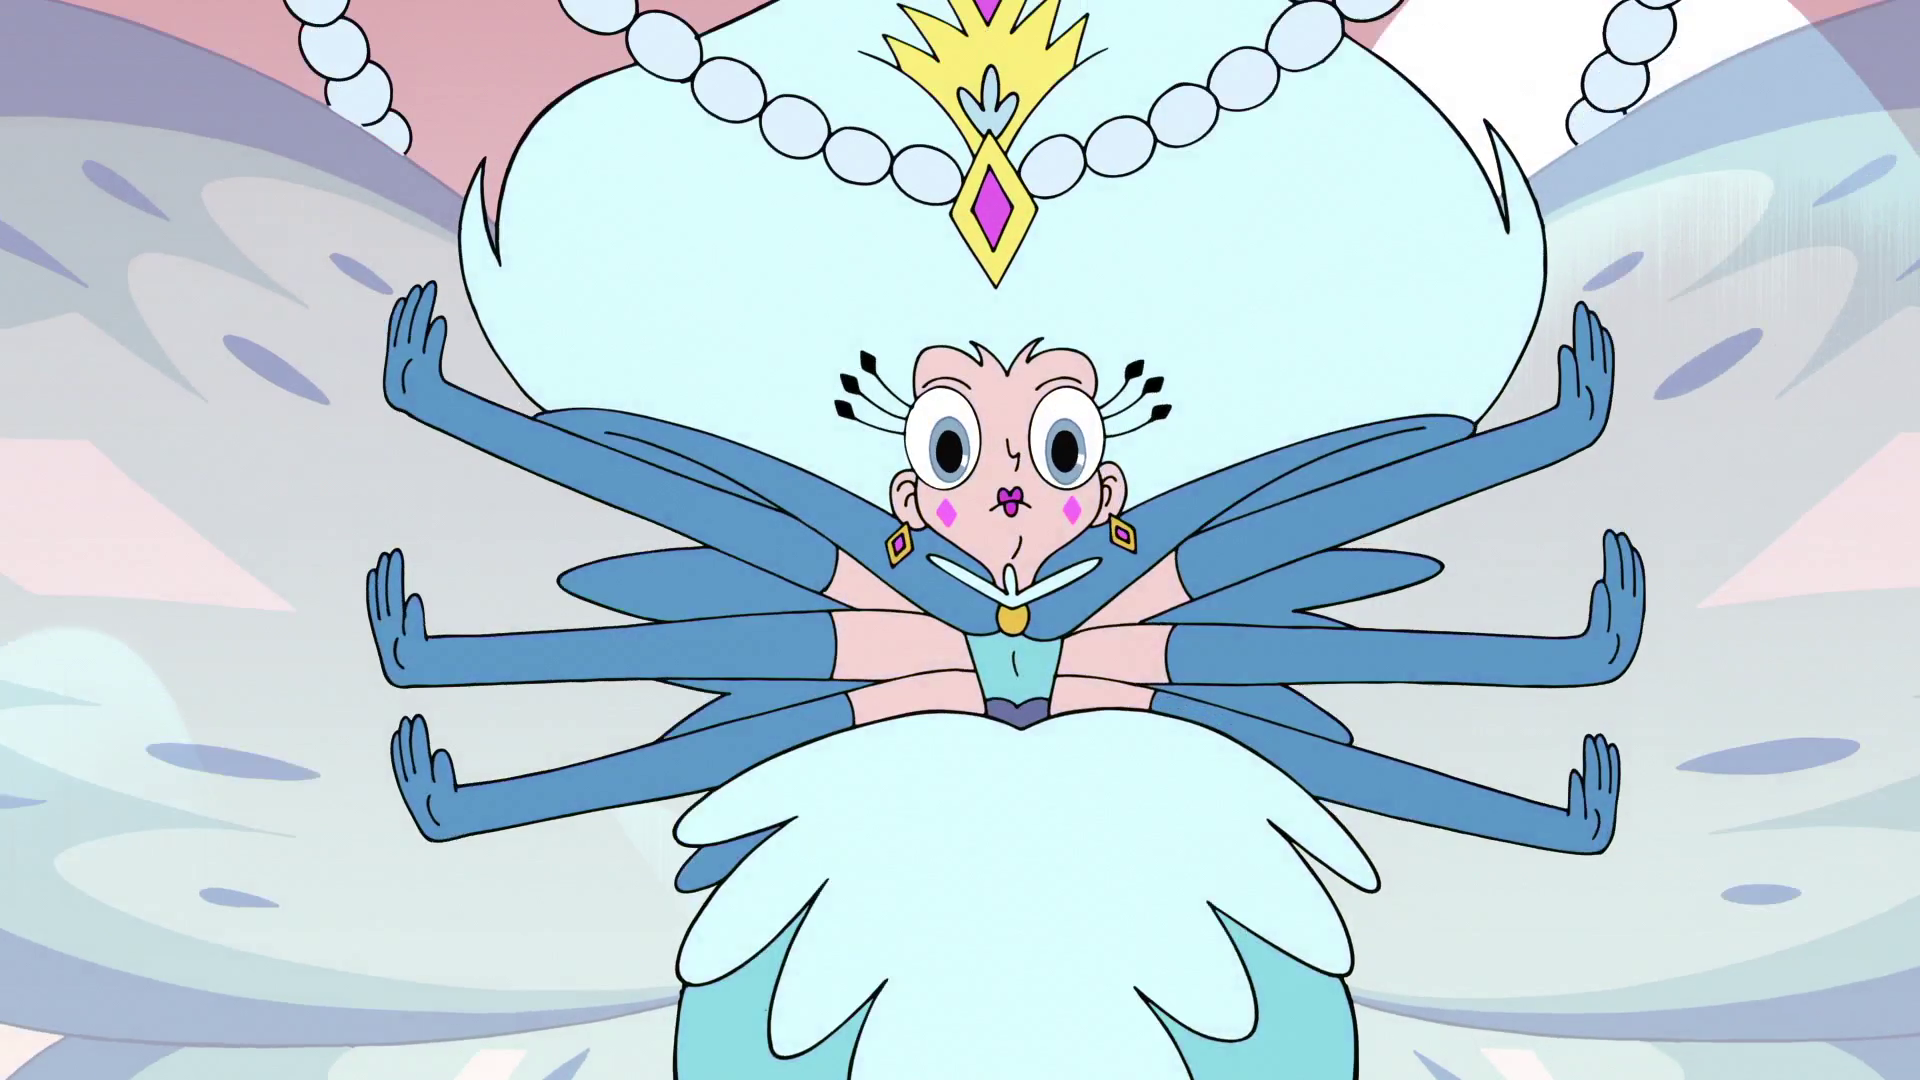 S2E15_Queen_Butterfly_with_wings_and_six_arms.png.